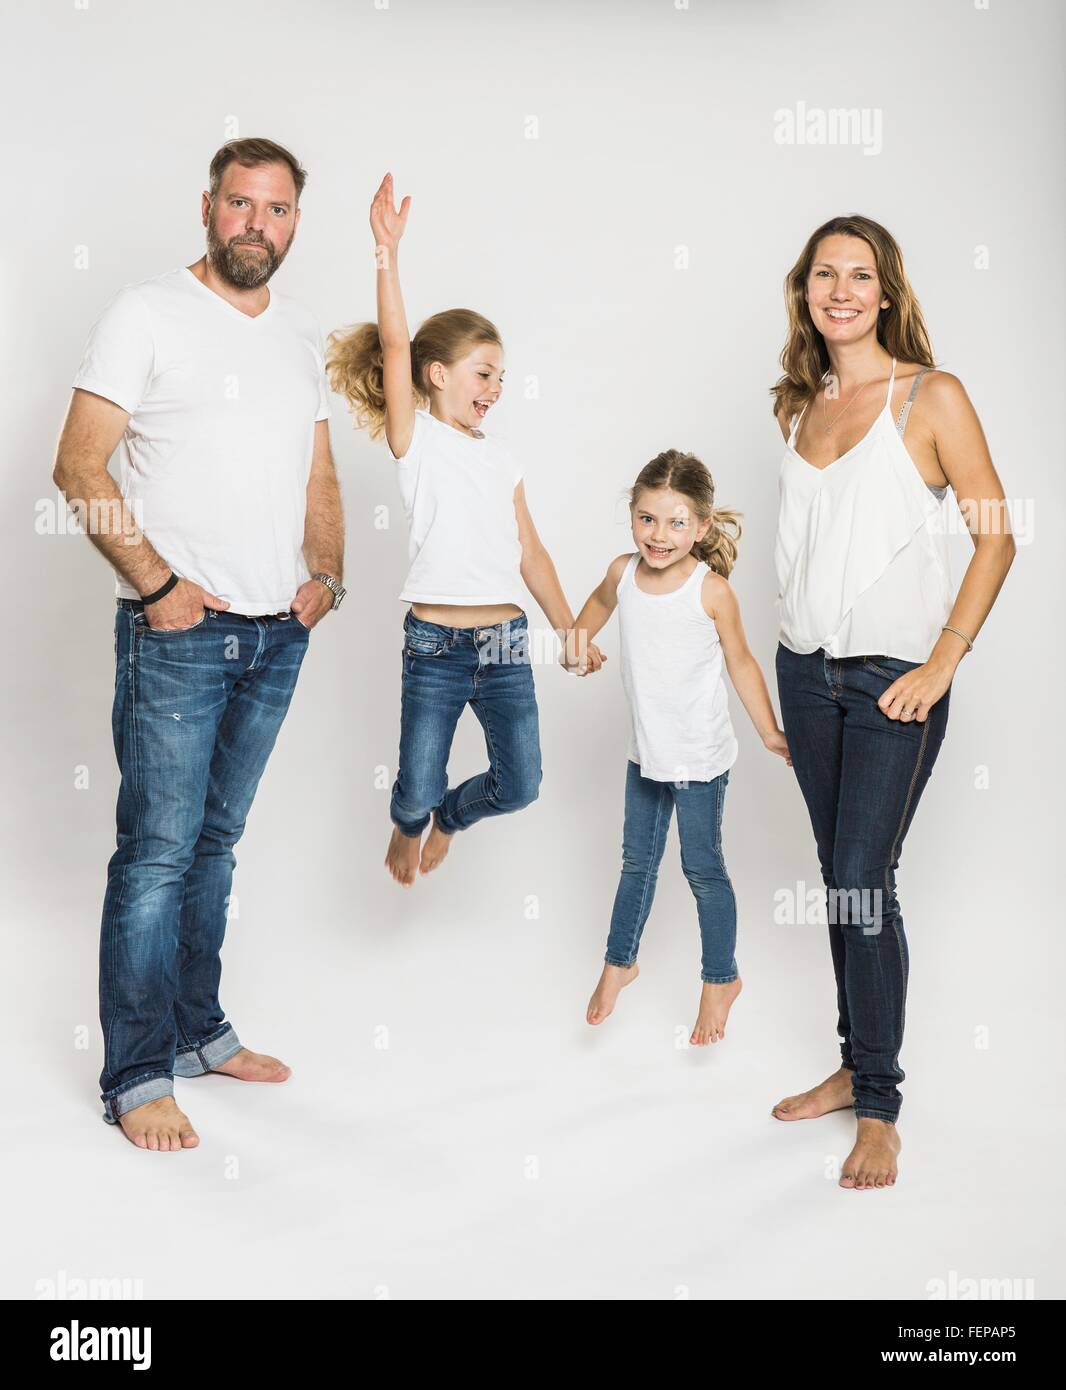 Studio portrait of two sisters jumping mid air between parents Stock Photo